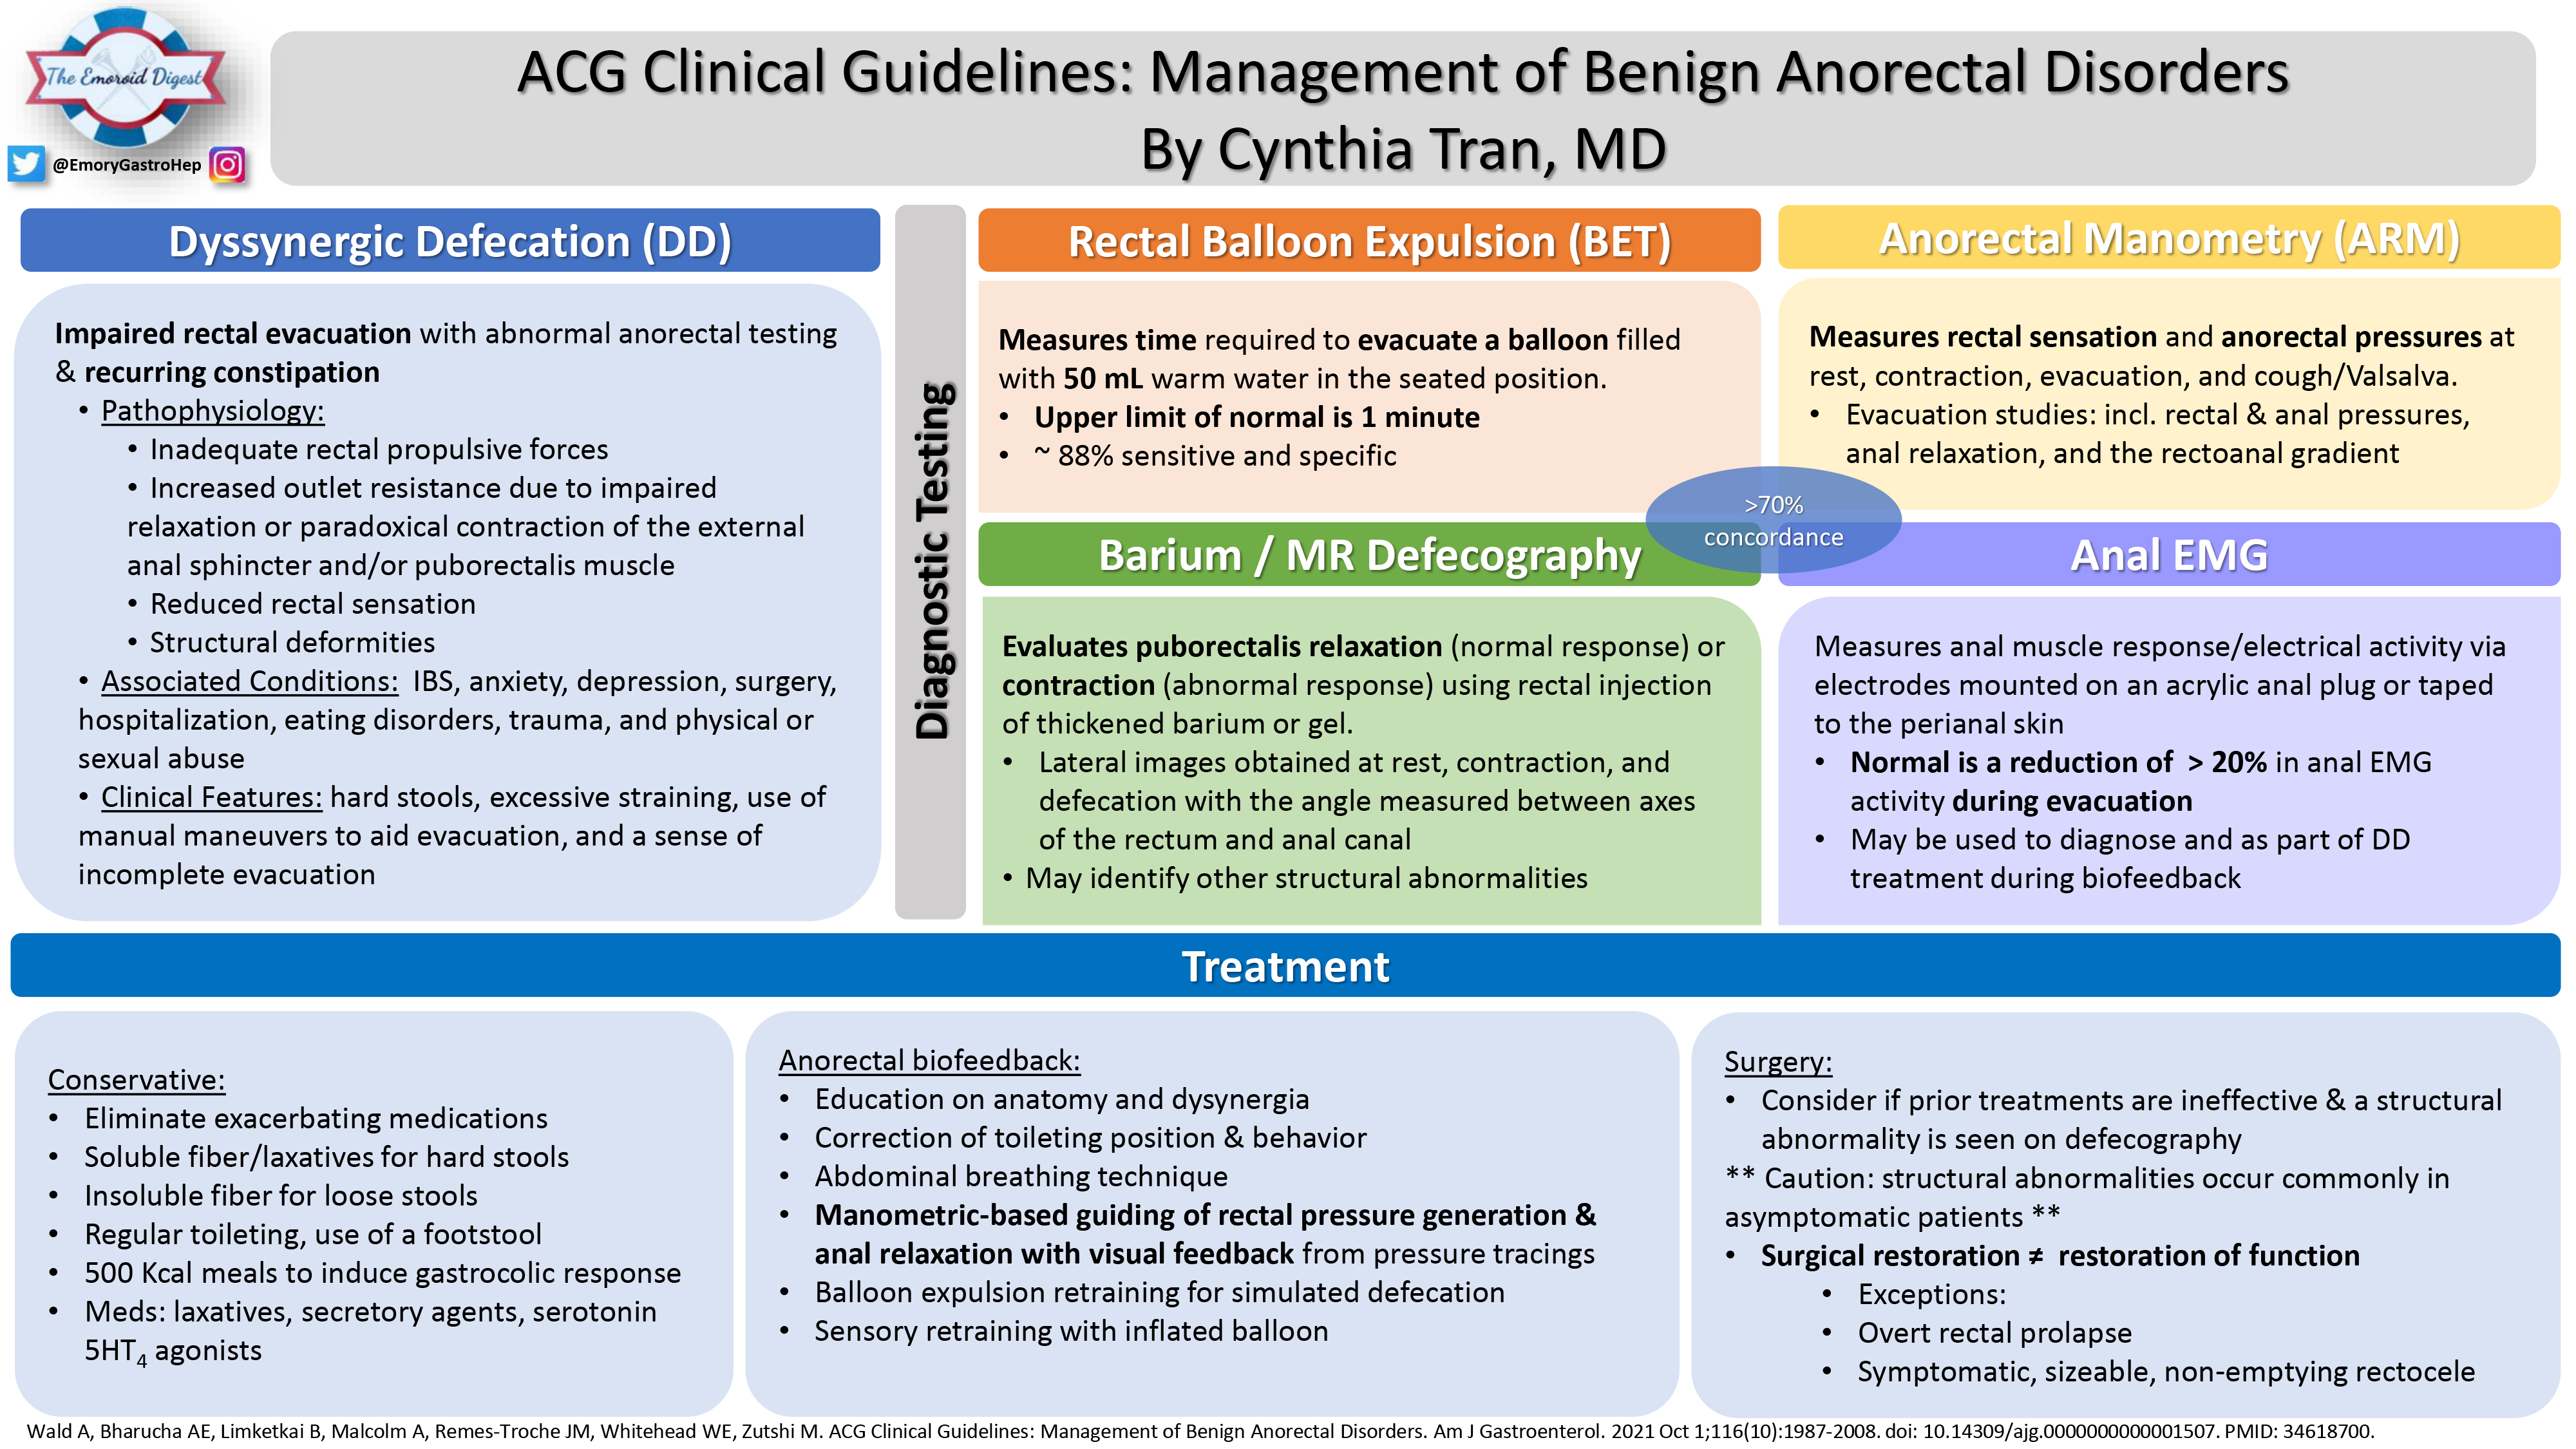 ACG Clinical Guidelines: Management of Benign Anorectal Disorders